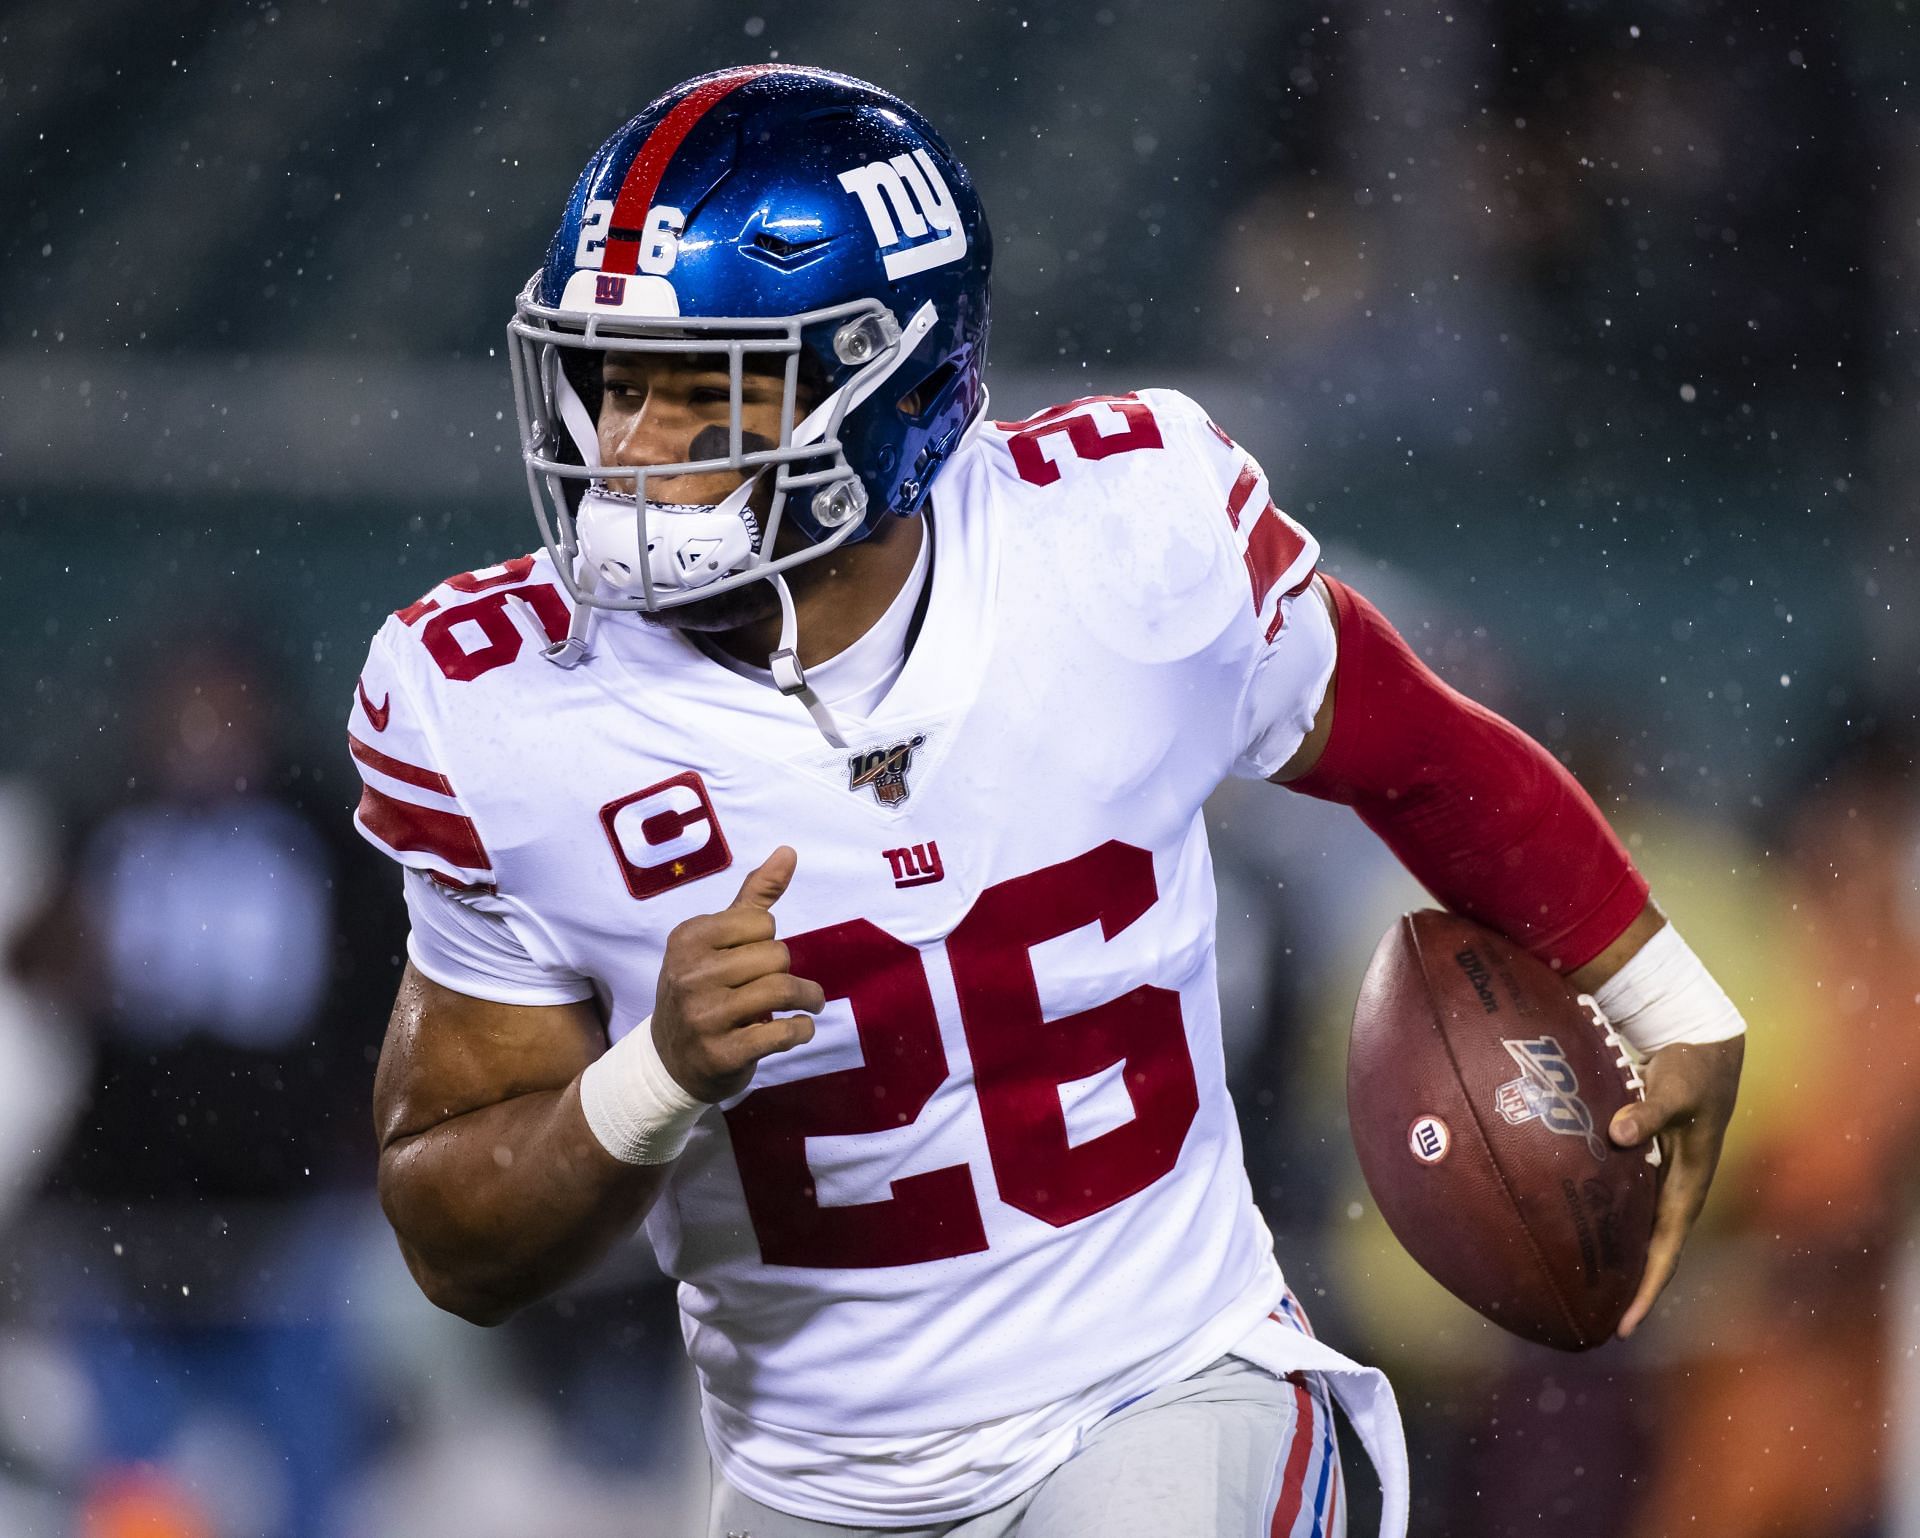 Saquon Barkley has not been supported during his Giants career.